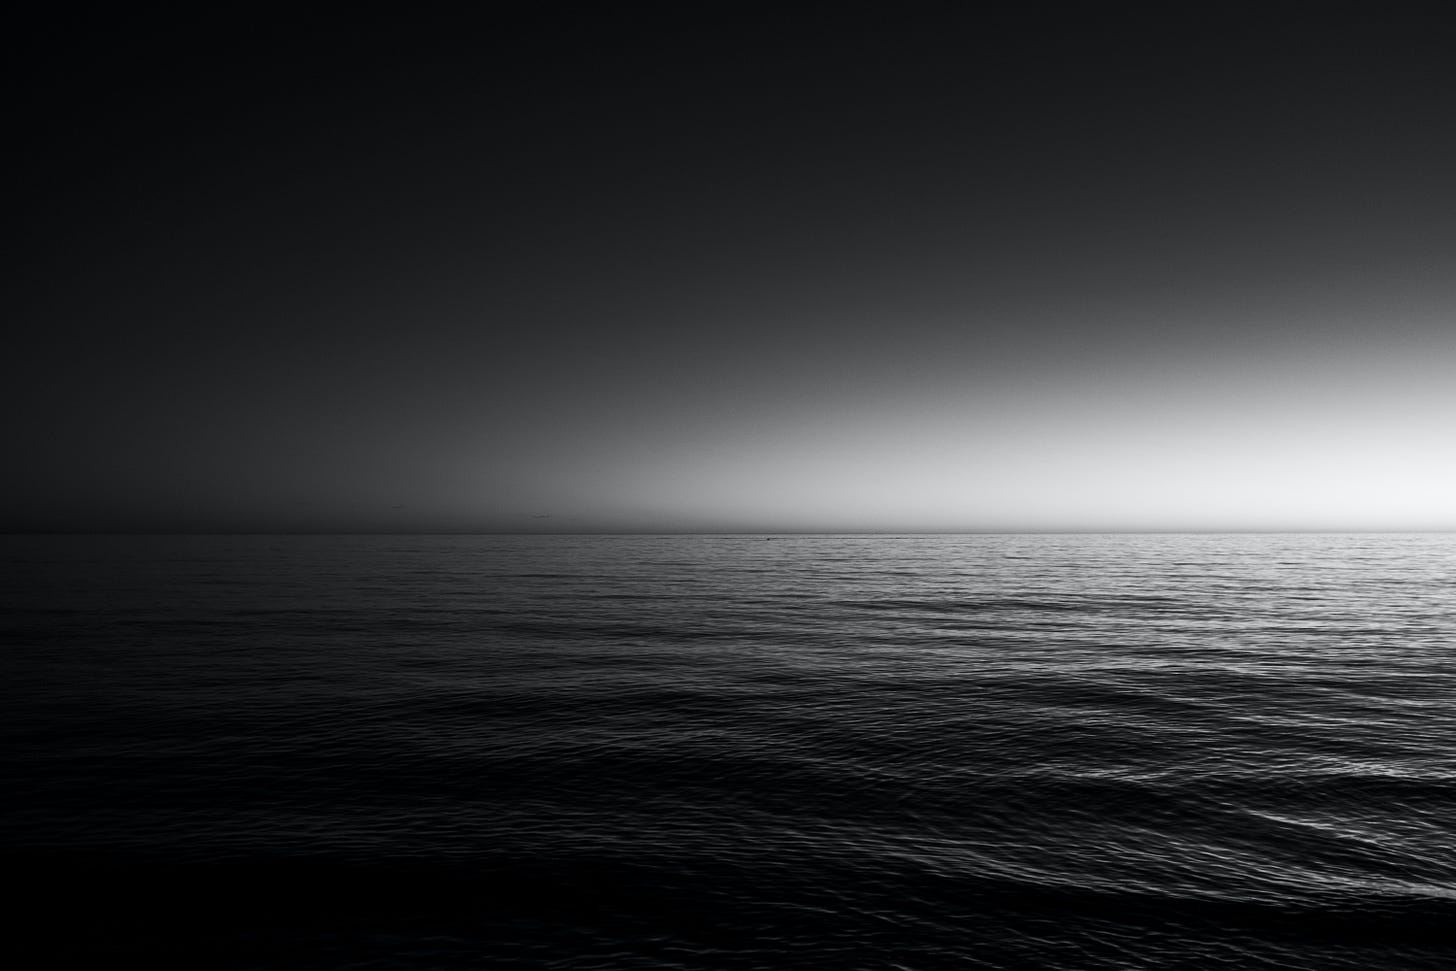 A black and white photo of a body of water with gentle waves rippling over the top. The sky is dark with a little bit of light on the horizon. The water is also dark.